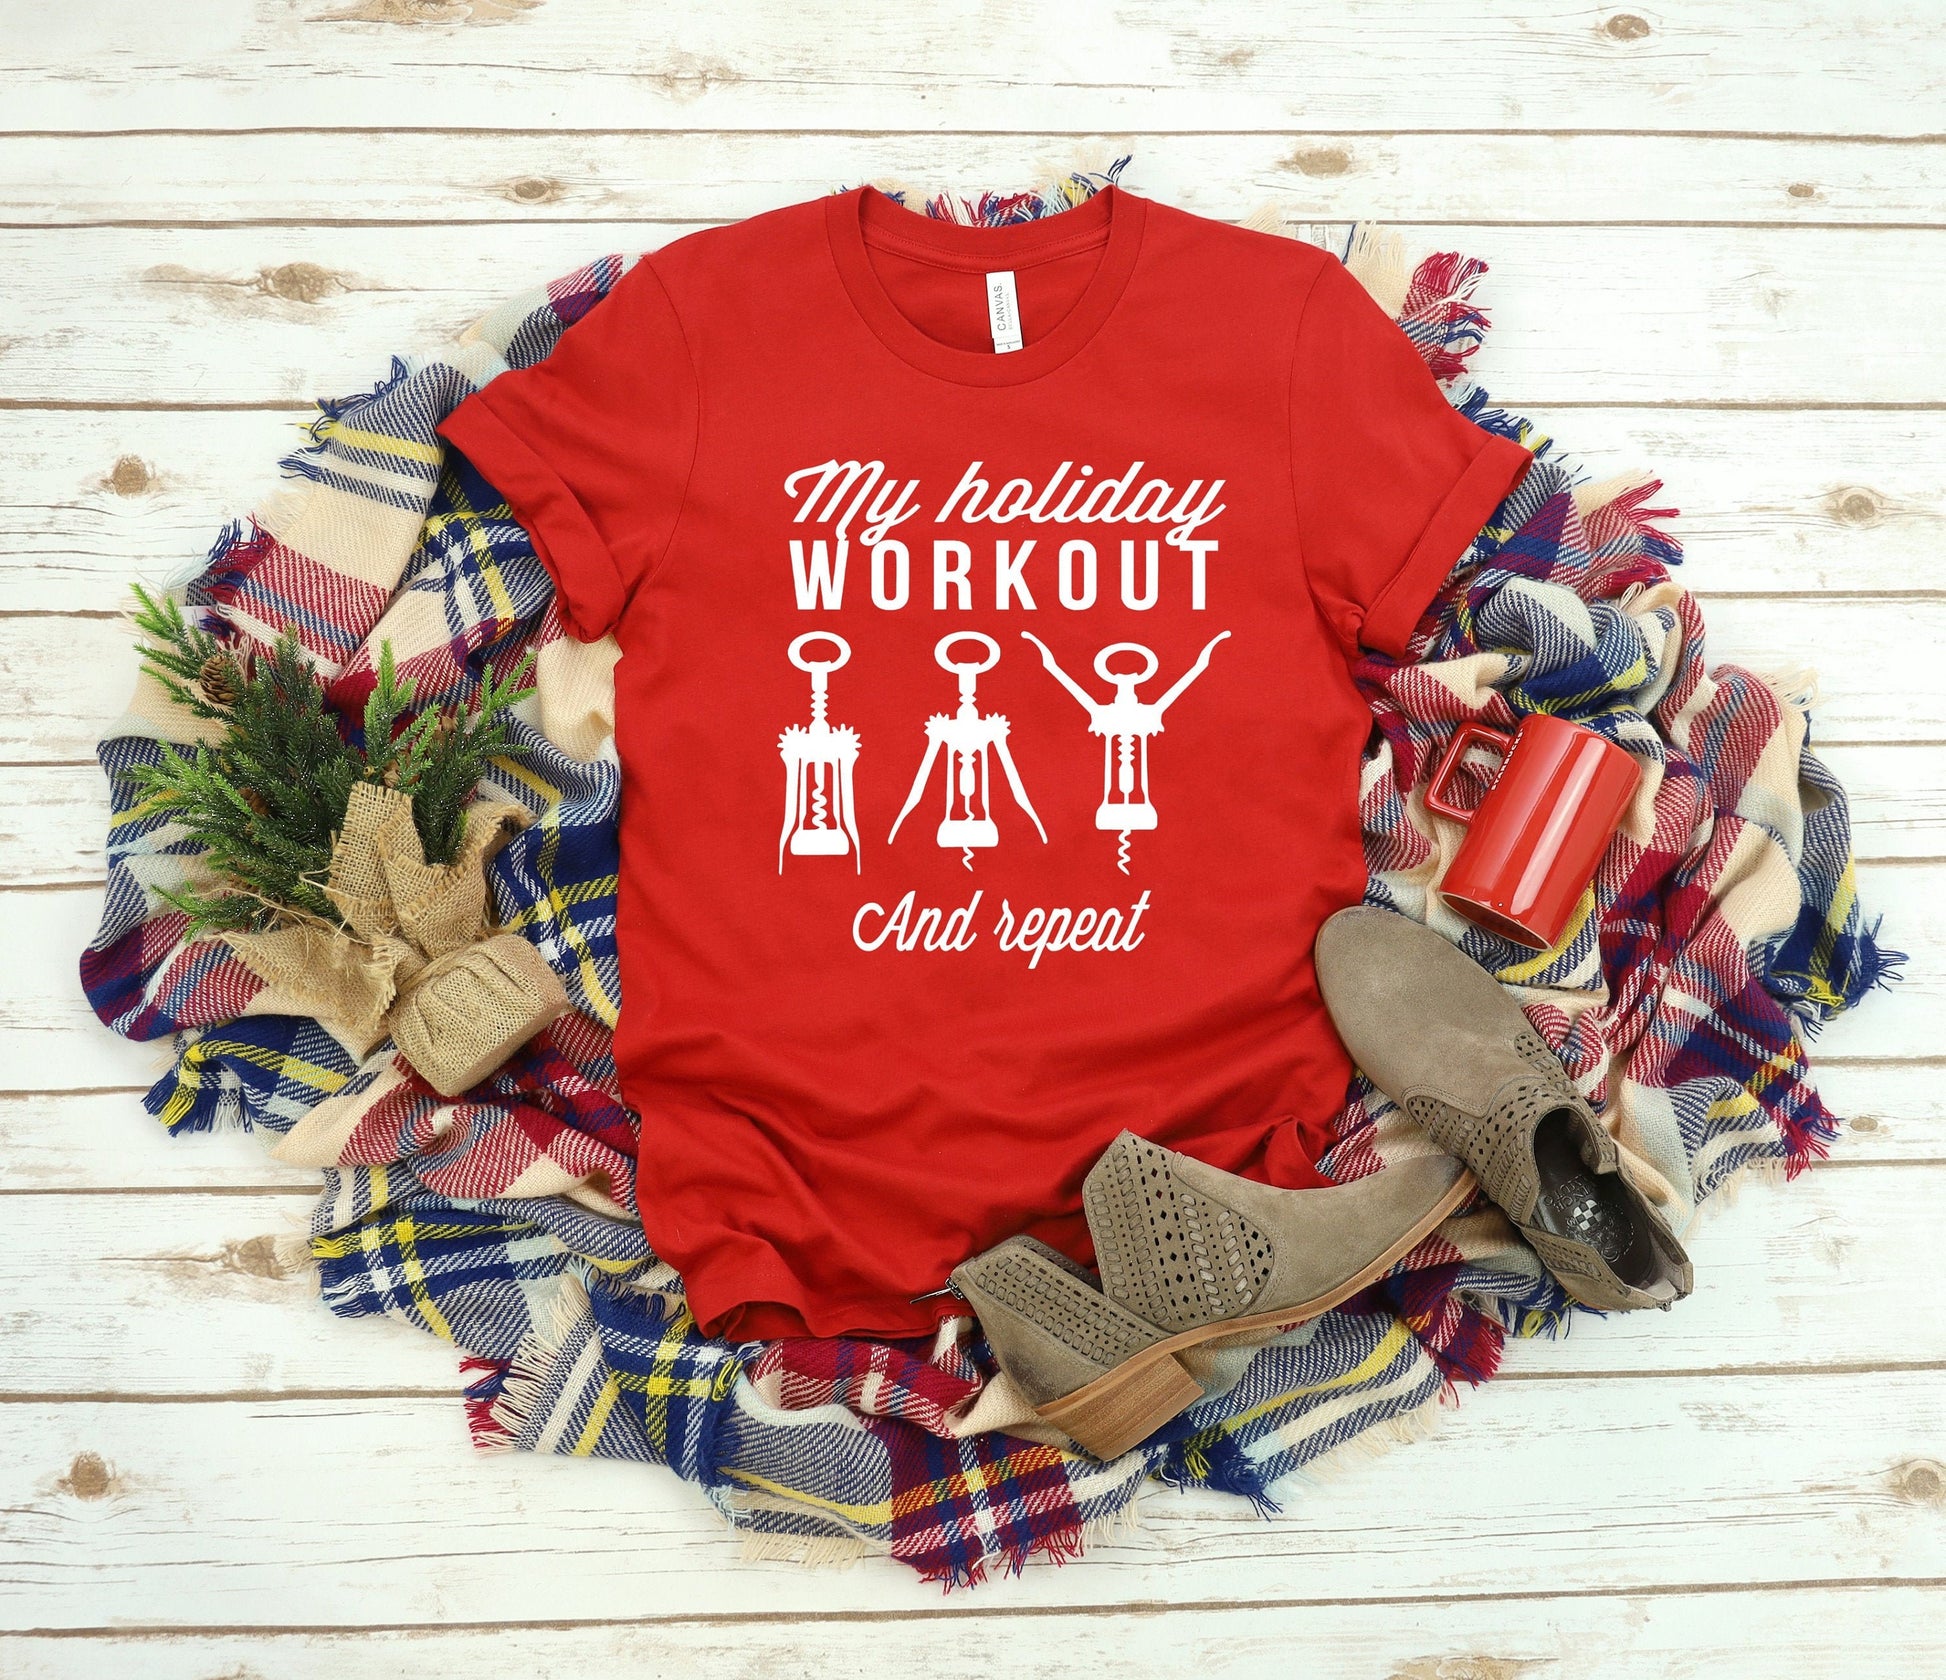 My Holiday Workout Women's Crewneck T-Shirt - Funny Drinking Shirt - Christmas Party Shirt - Wine Shirt - wine lover gift - wine tee